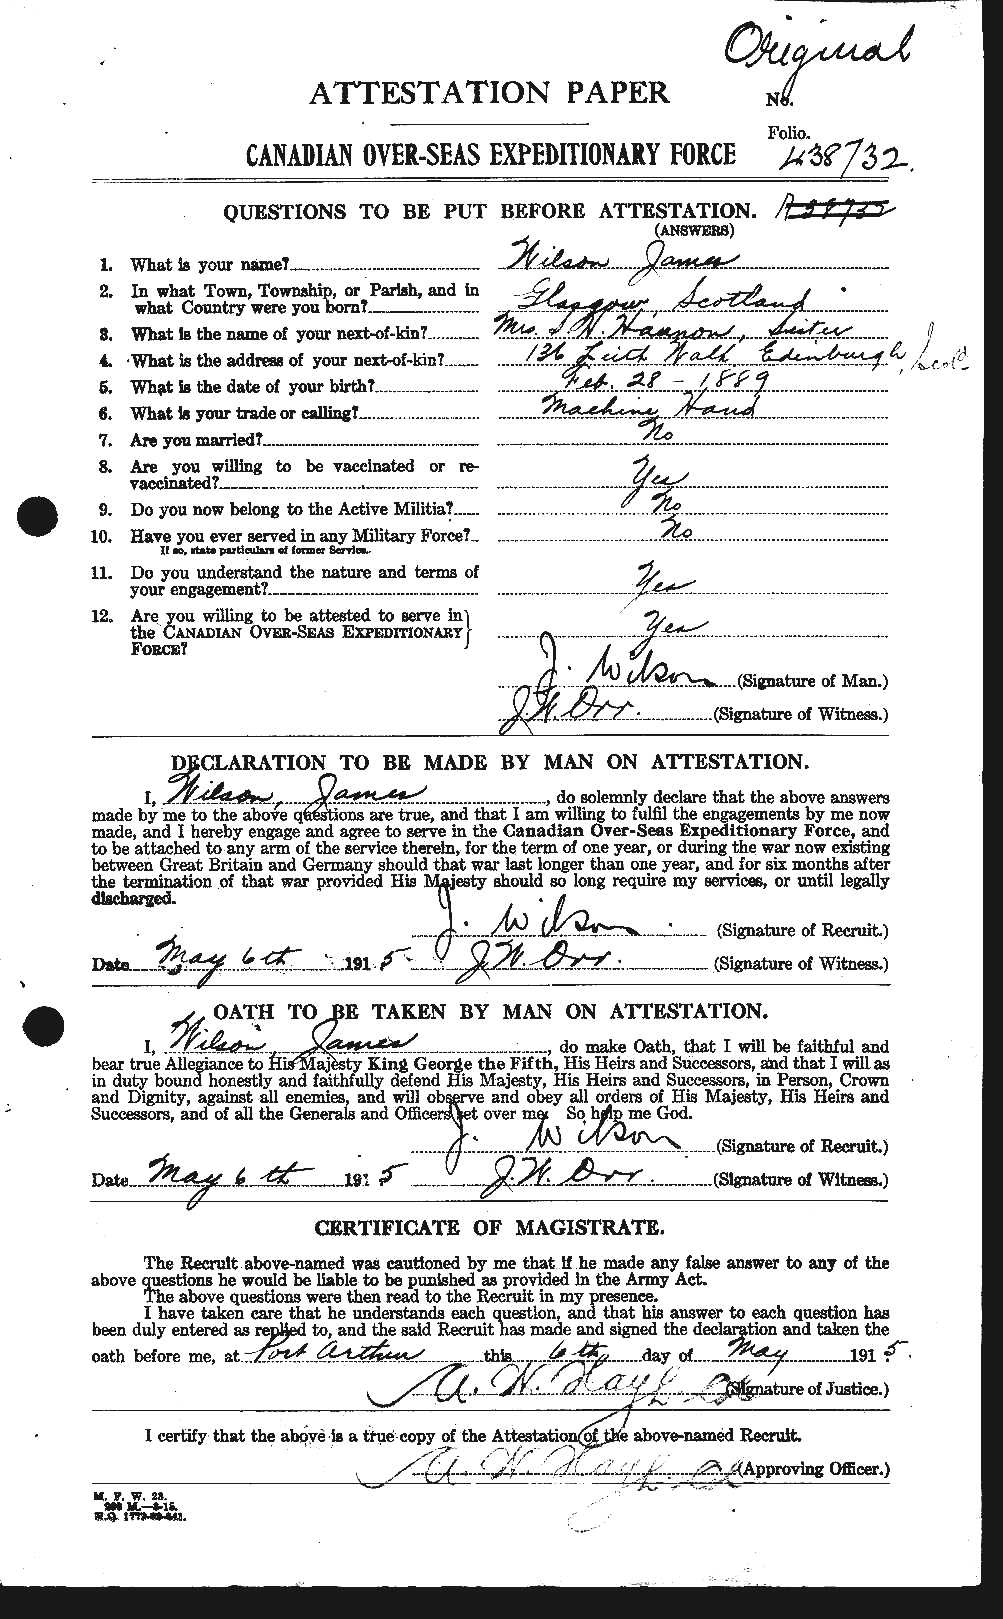 Personnel Records of the First World War - CEF 681379a